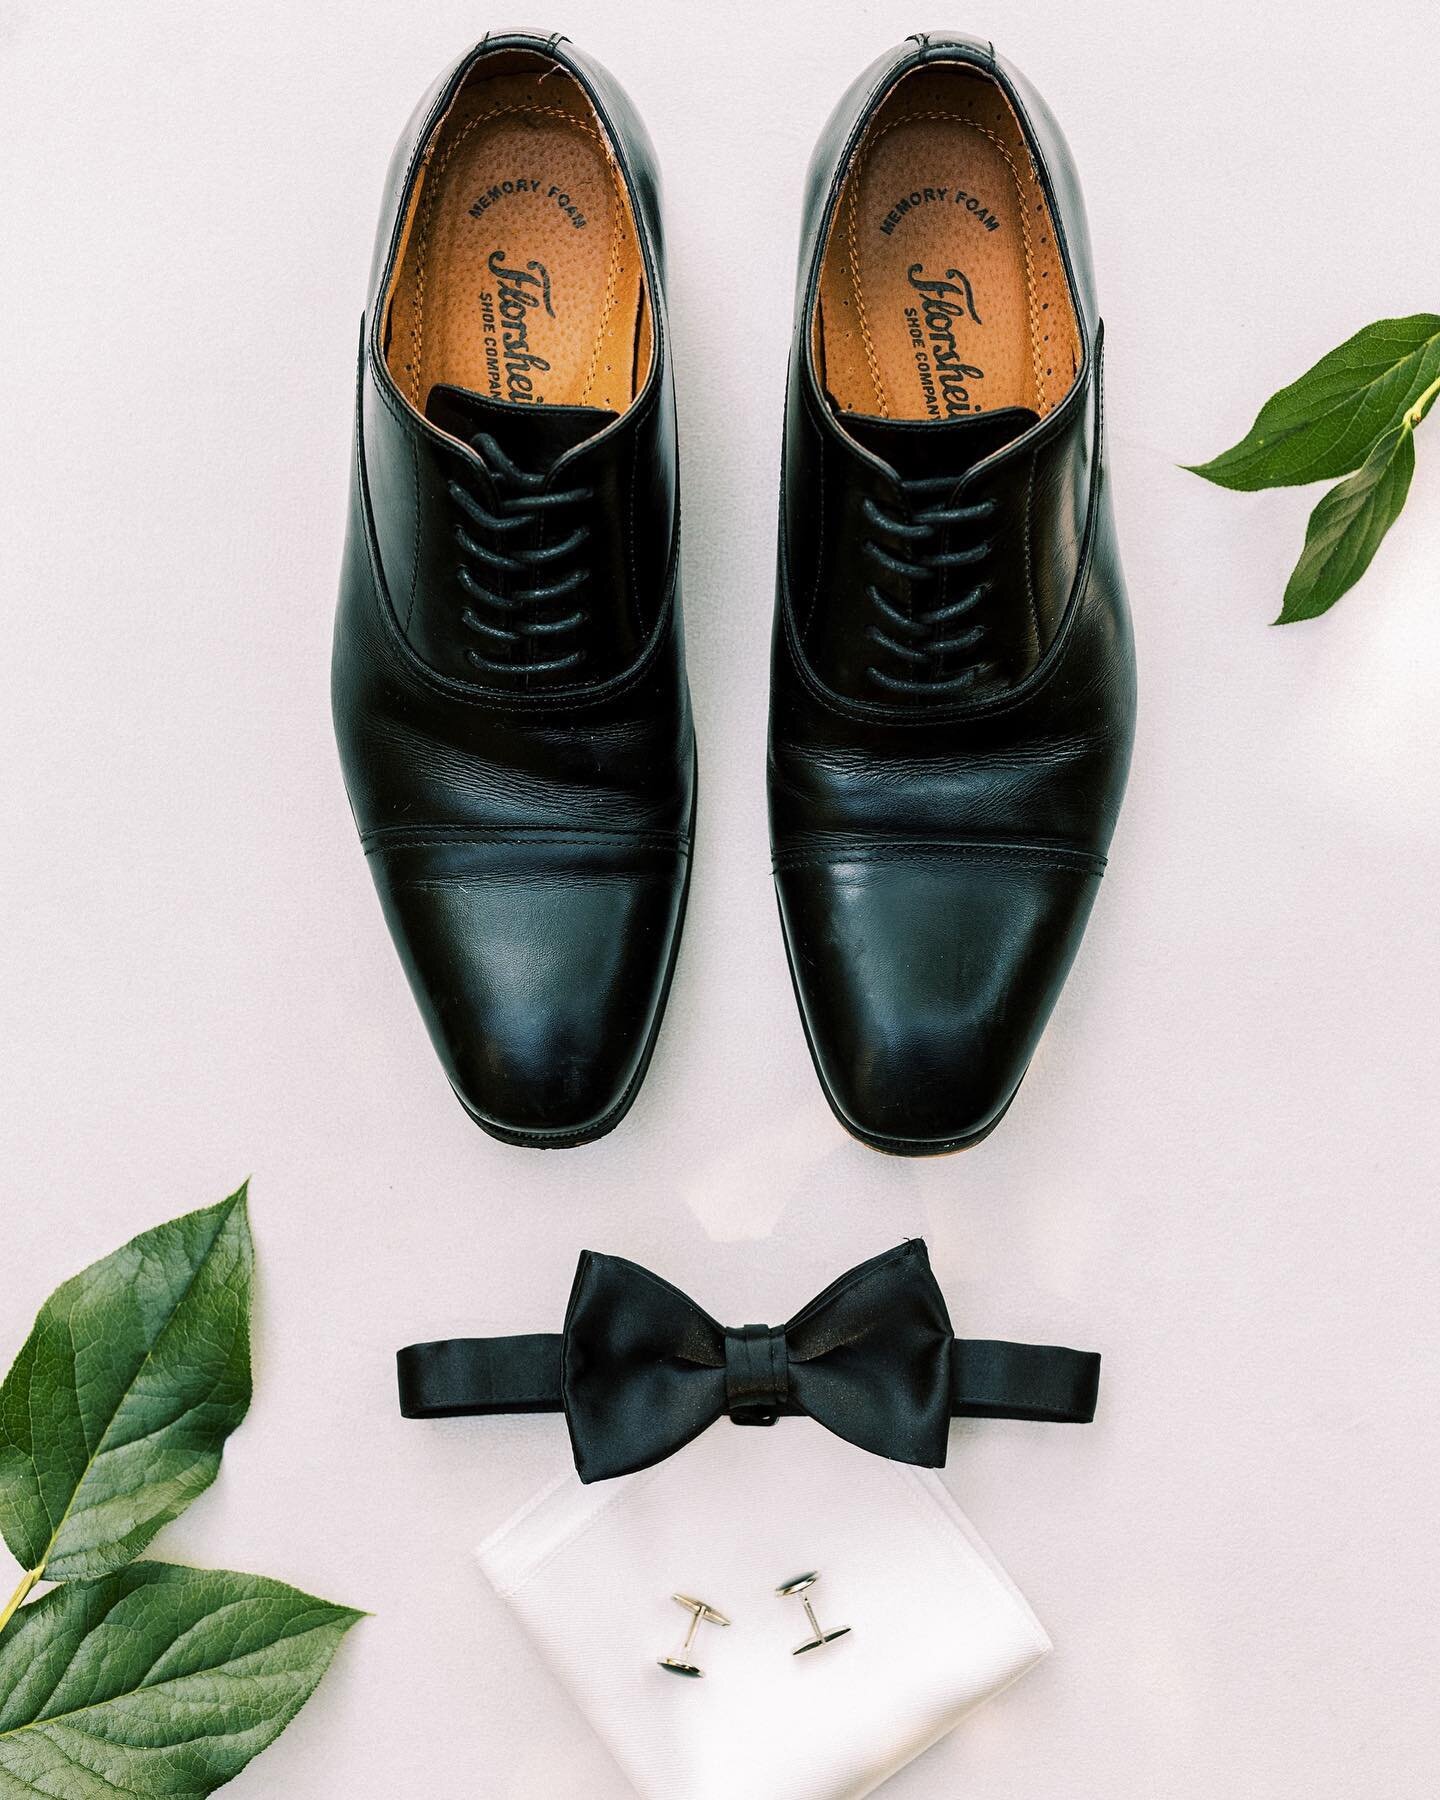 Let&rsquo;s give it up for fashionable grooms!  You can never go wrong with some classic black details on your wedding day.